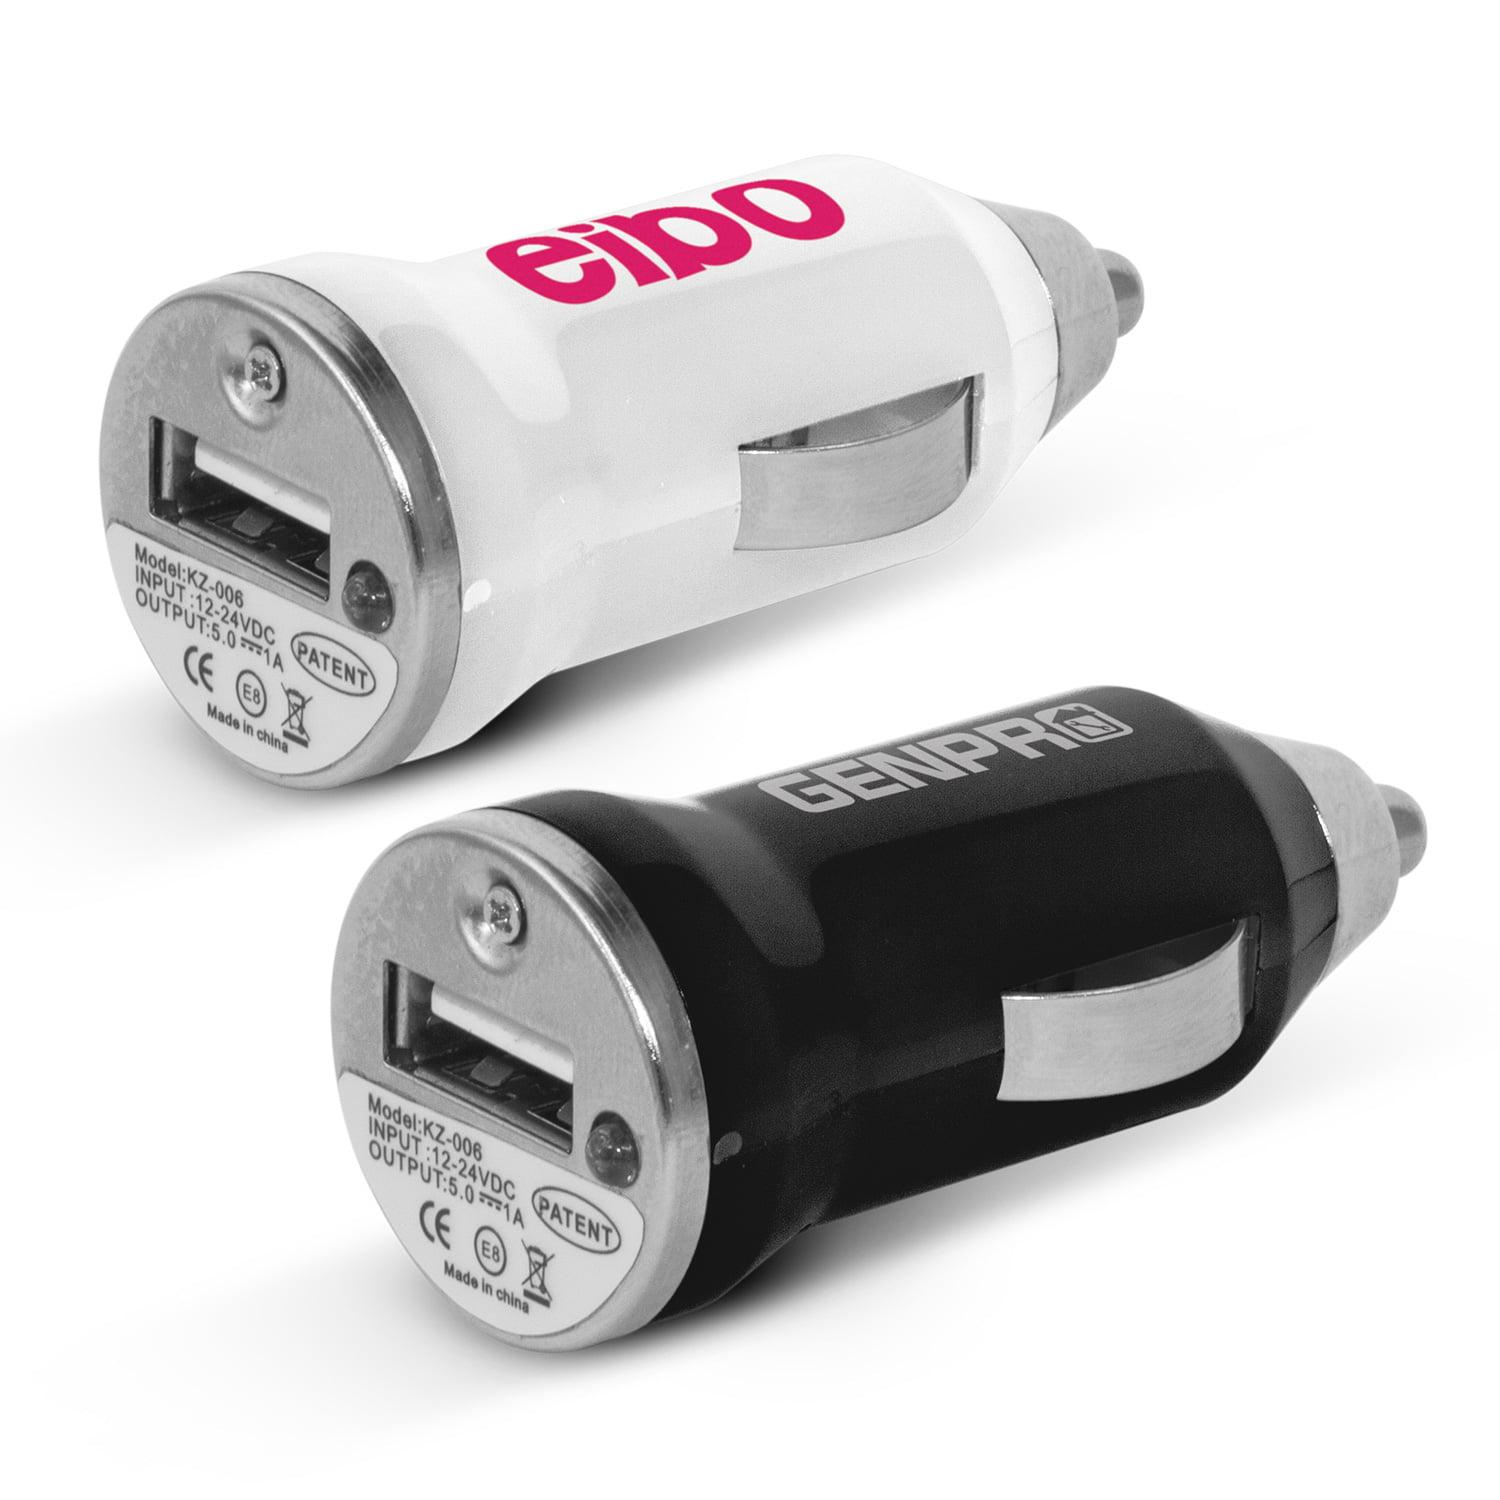 car-usb-chargers-img